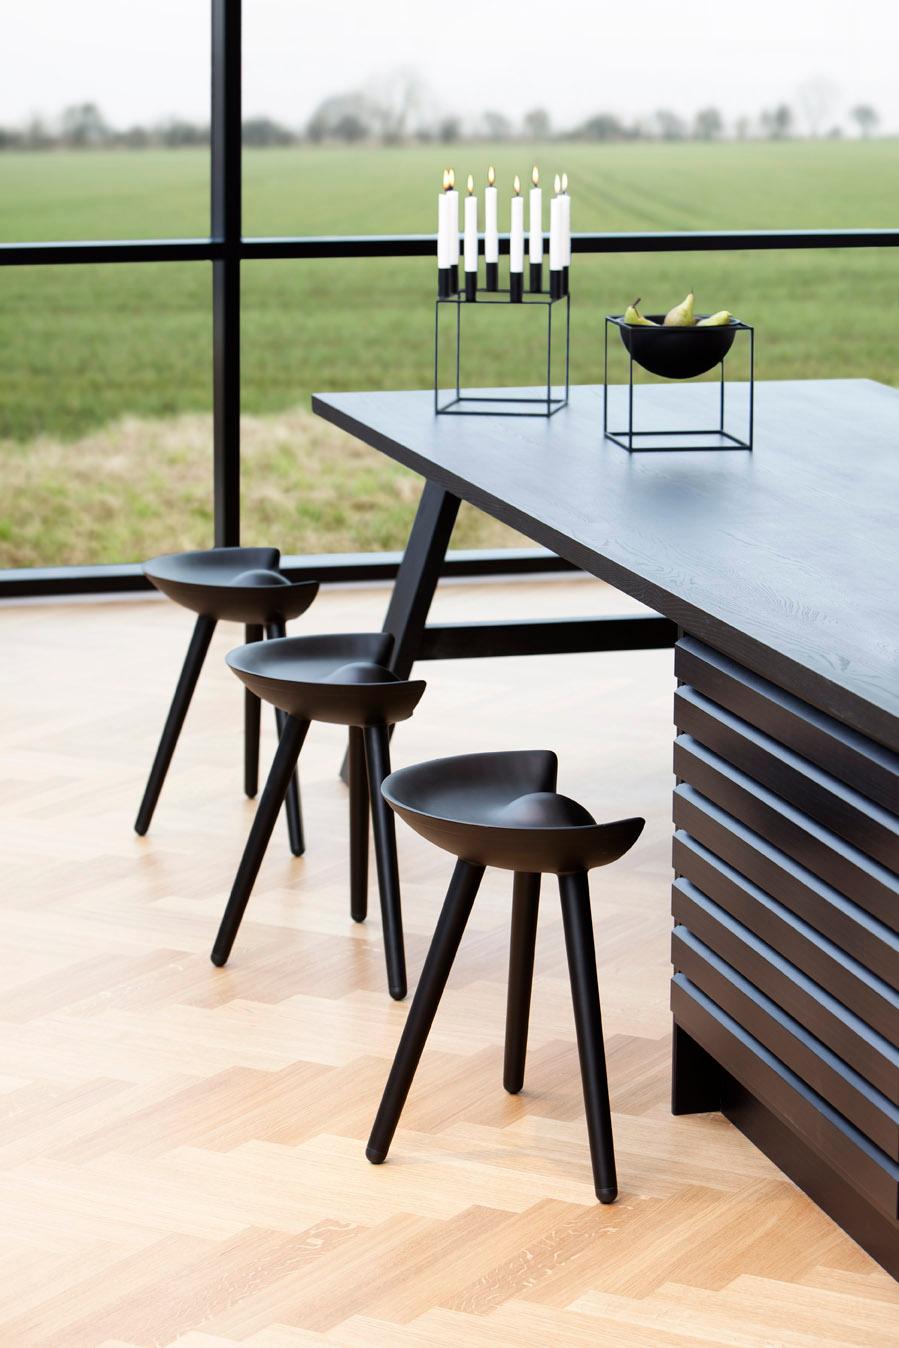 ML 42 Black Beech Stool by Lassen
Dimensions: H 48 x W 36 x L 55.5 cm
Materials: Beech

In 1942 Mogens Lassen designed the Stool ML42 as a piece for a furniture exhibition held at the Danish Museum of Decorative Art. He took inspiration from the